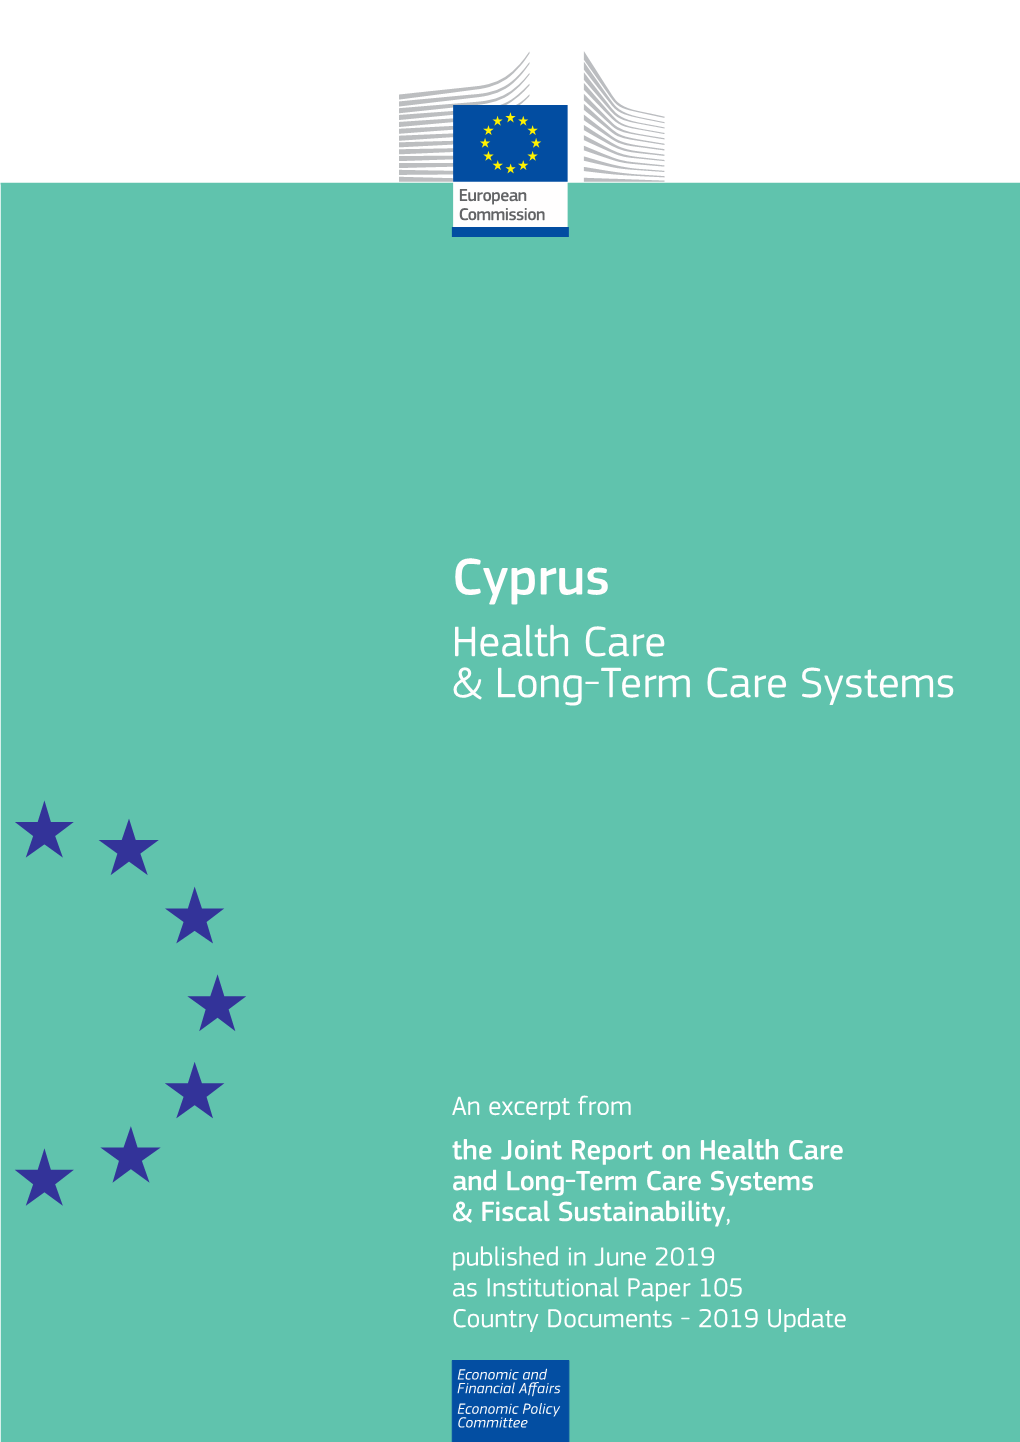 Cyprus Health Care & Long-Term Care Systems